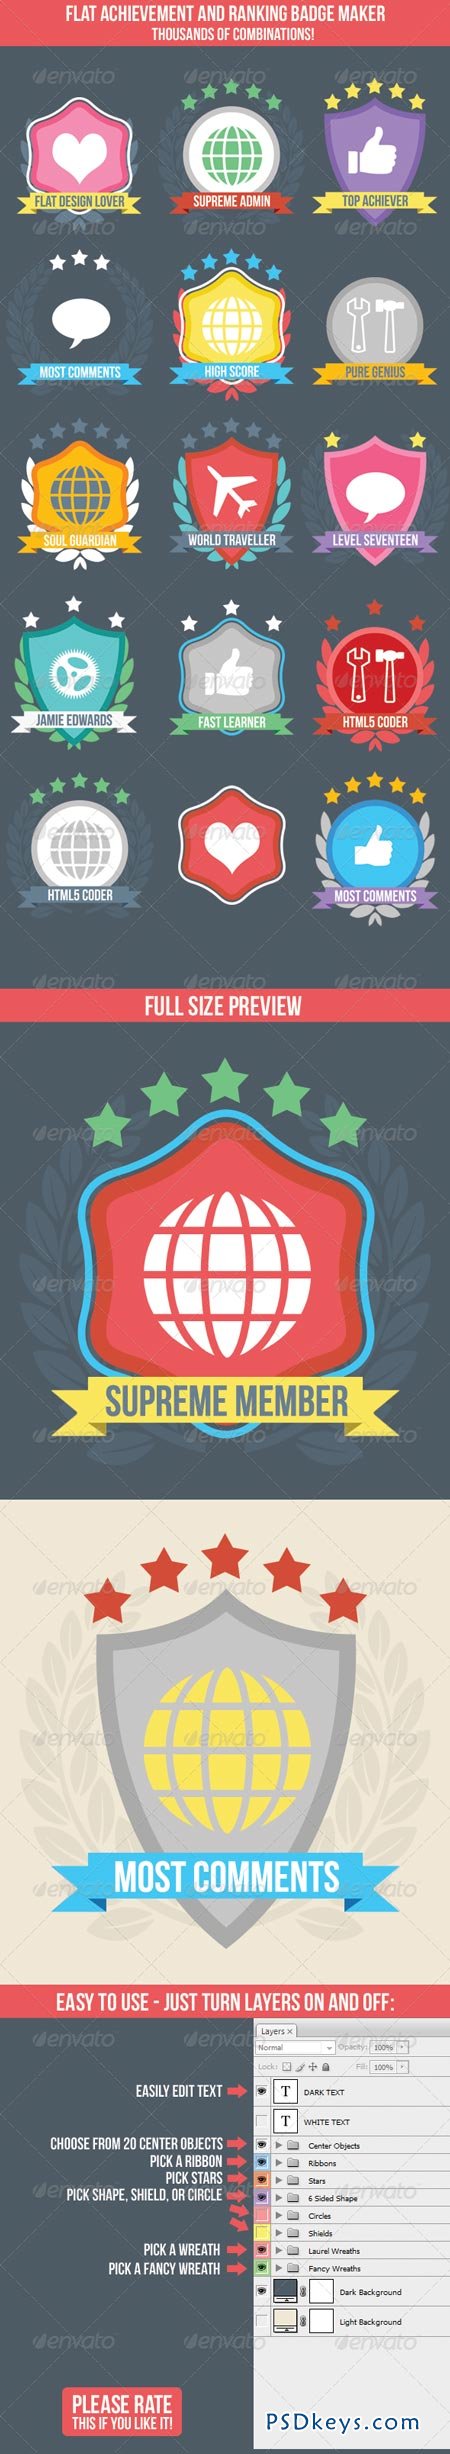 Flat Badge Maker for Ranking or Achievement 6961033